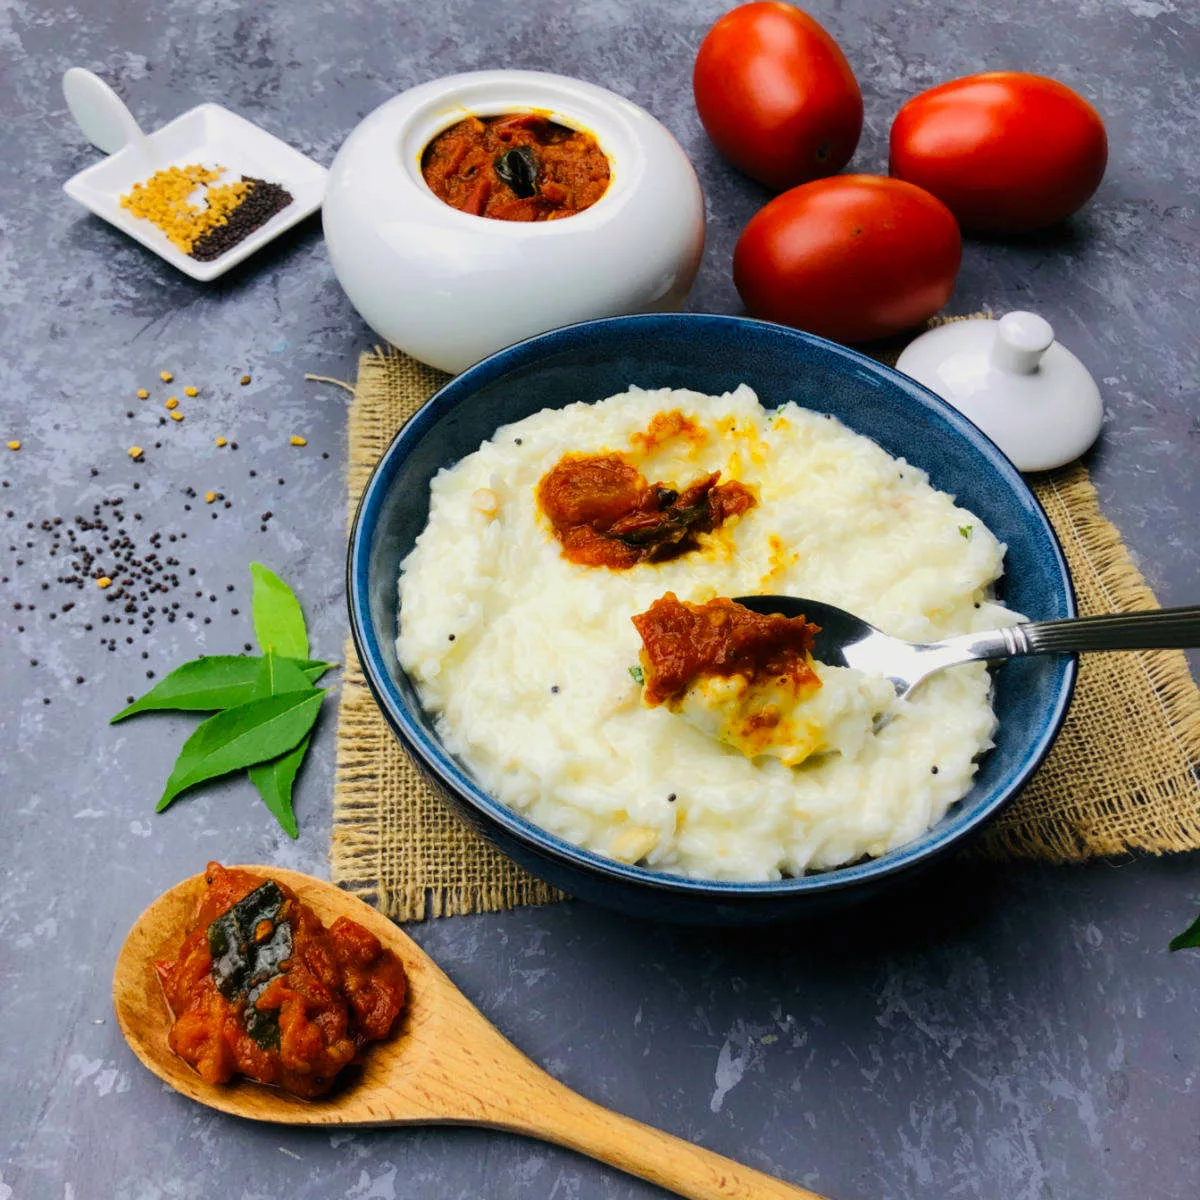 Tomato pickle served with curd rice.